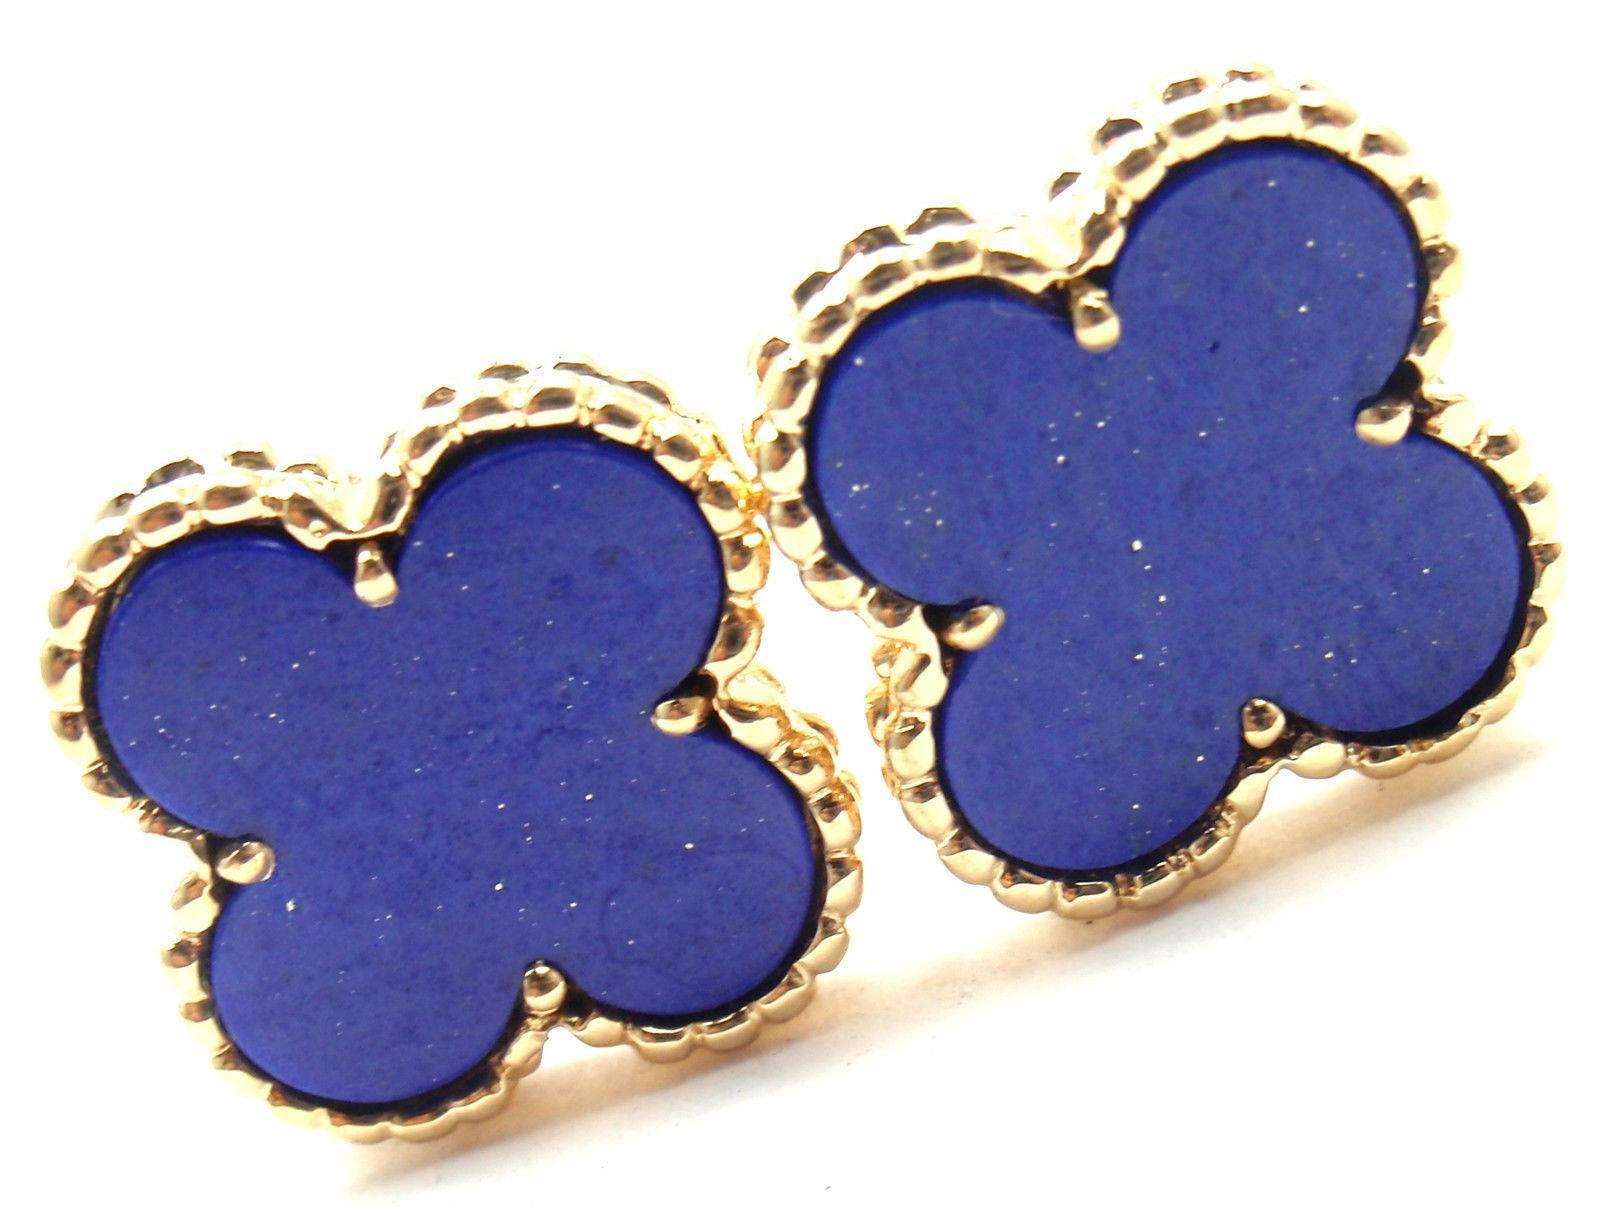 18k Yellow Gold Vintage Alhambra Lapis Lazuli Earrings by Van Cleef & Arpels.  
With 2 lapis lazuli alhambra shape stones: 15mm each. 
These earrings are for pierced ears.  
These earrings come with service paper from Japanese Van Cleef & Arpels